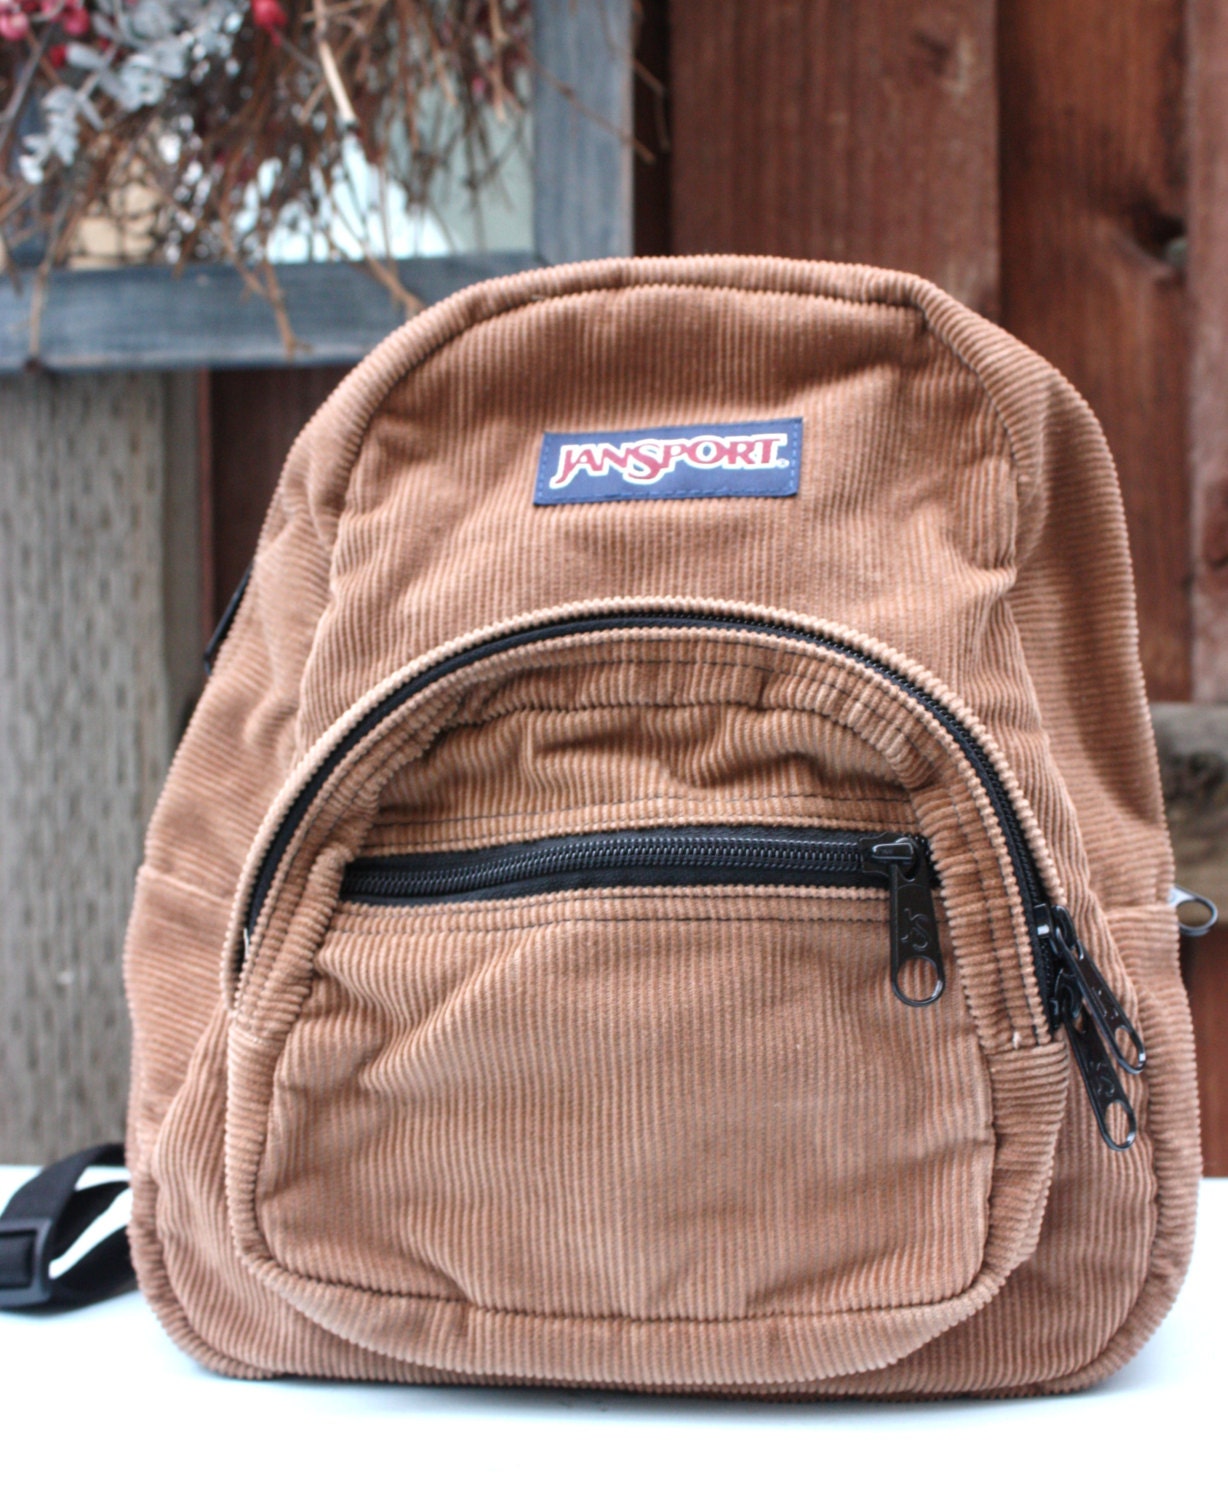 Jansport Small Backpack Mini | Paul Smith